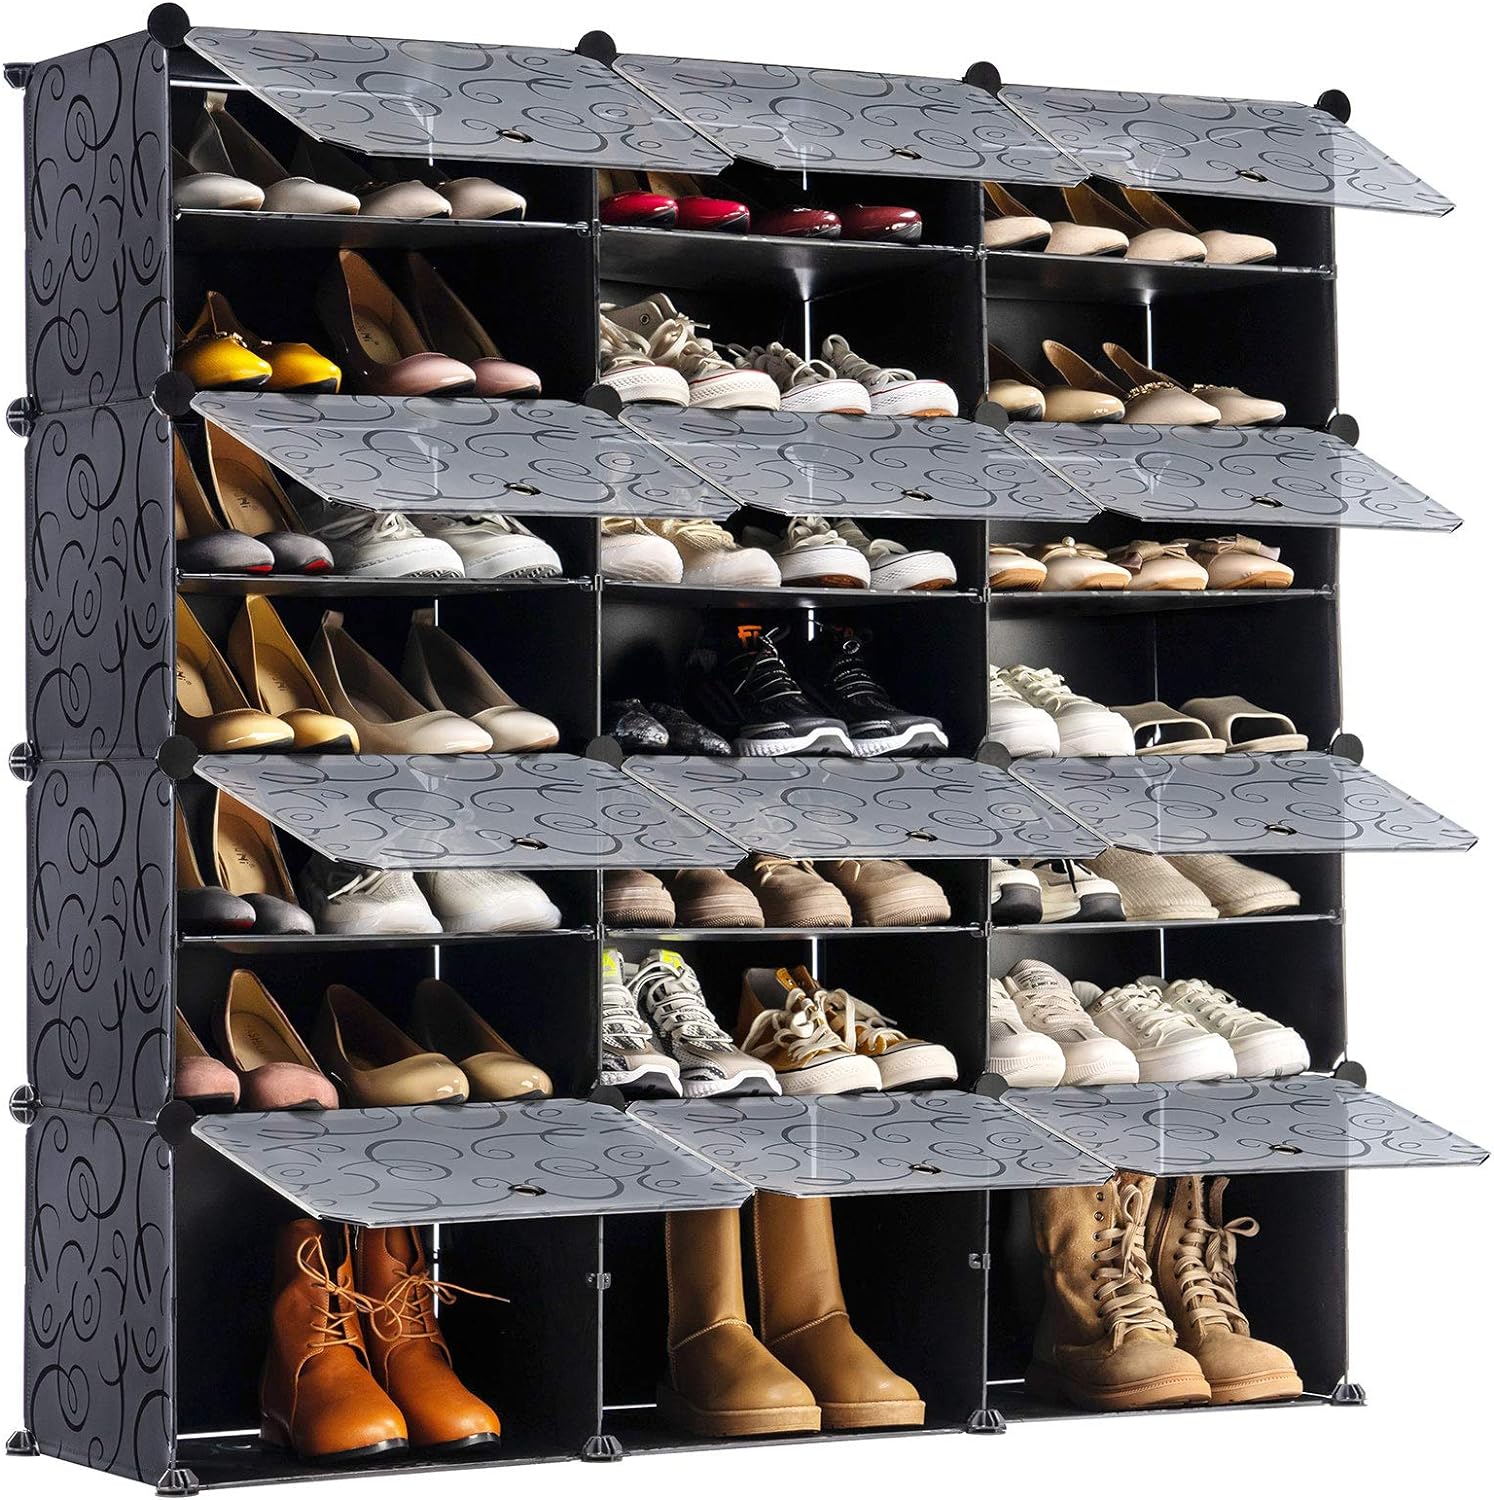 YOUDENOVA Portable Shoe Rack Organizer, 48-Pair Tower Shelf Storage Cabinets, Plastic Shoe Organizer for Entryway, Expandable for Heels,Boots,Slippers